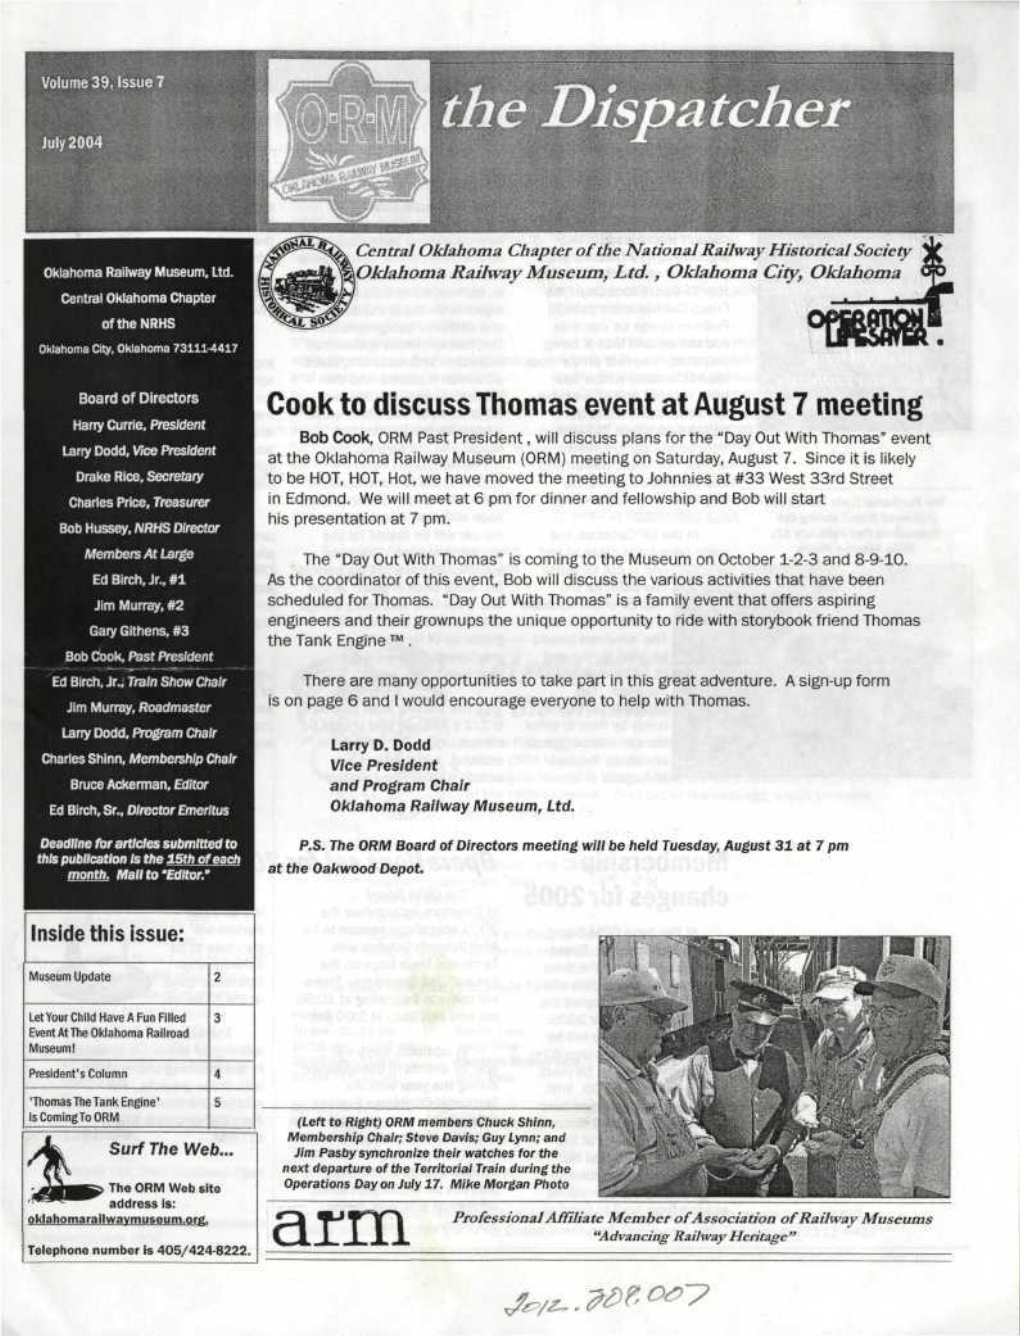 Cook to Discuss Thomas Event at August 7 Meeting